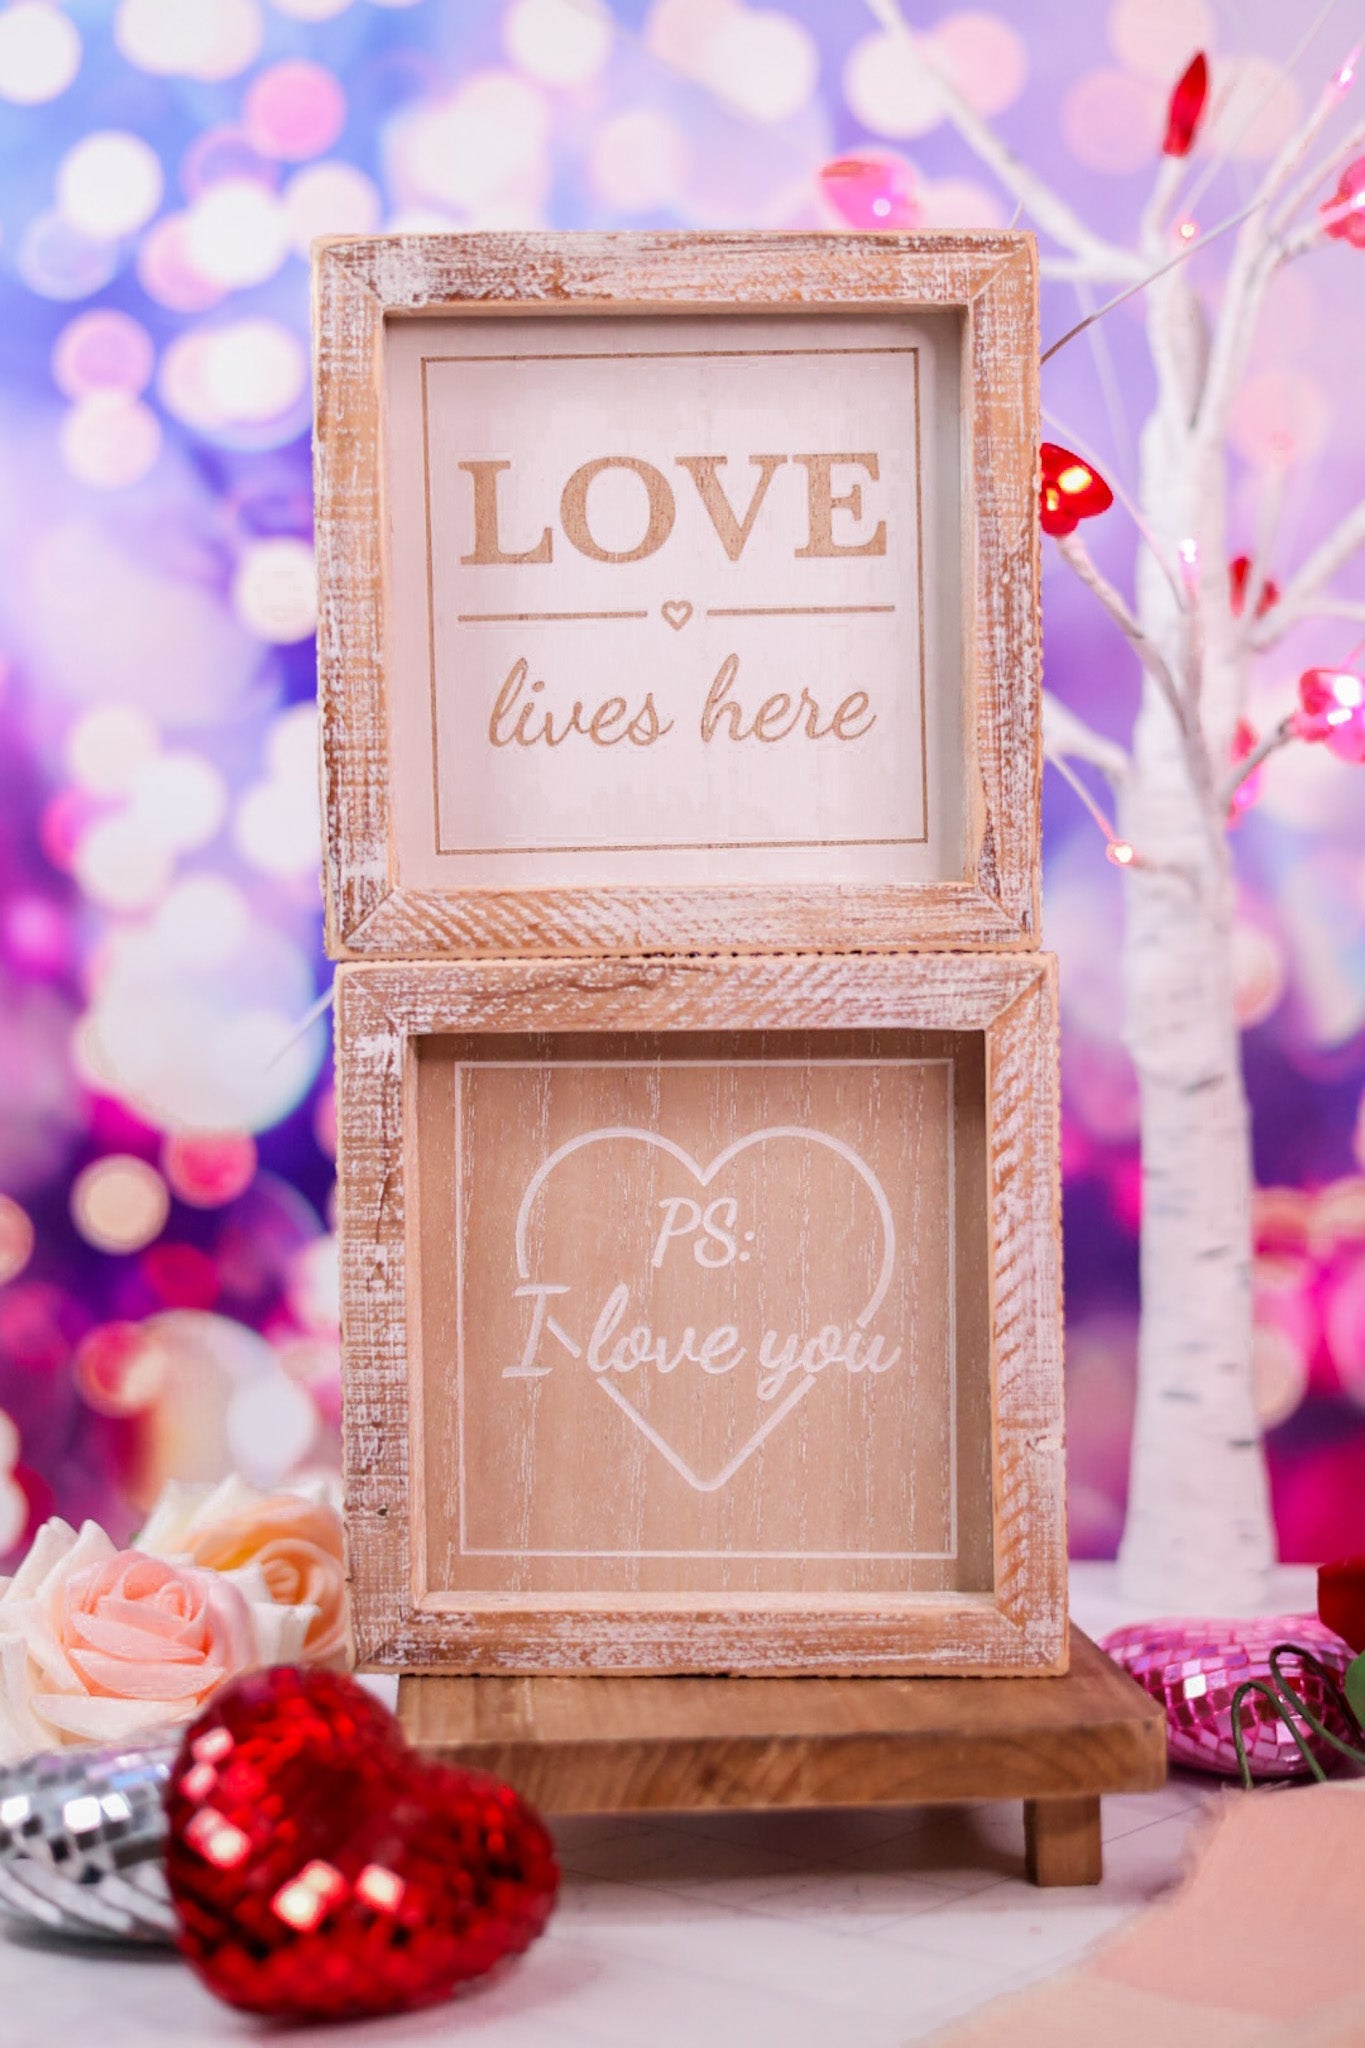 Double Sided "P.S. I Love You" Wooden Sign - Whiskey Skies